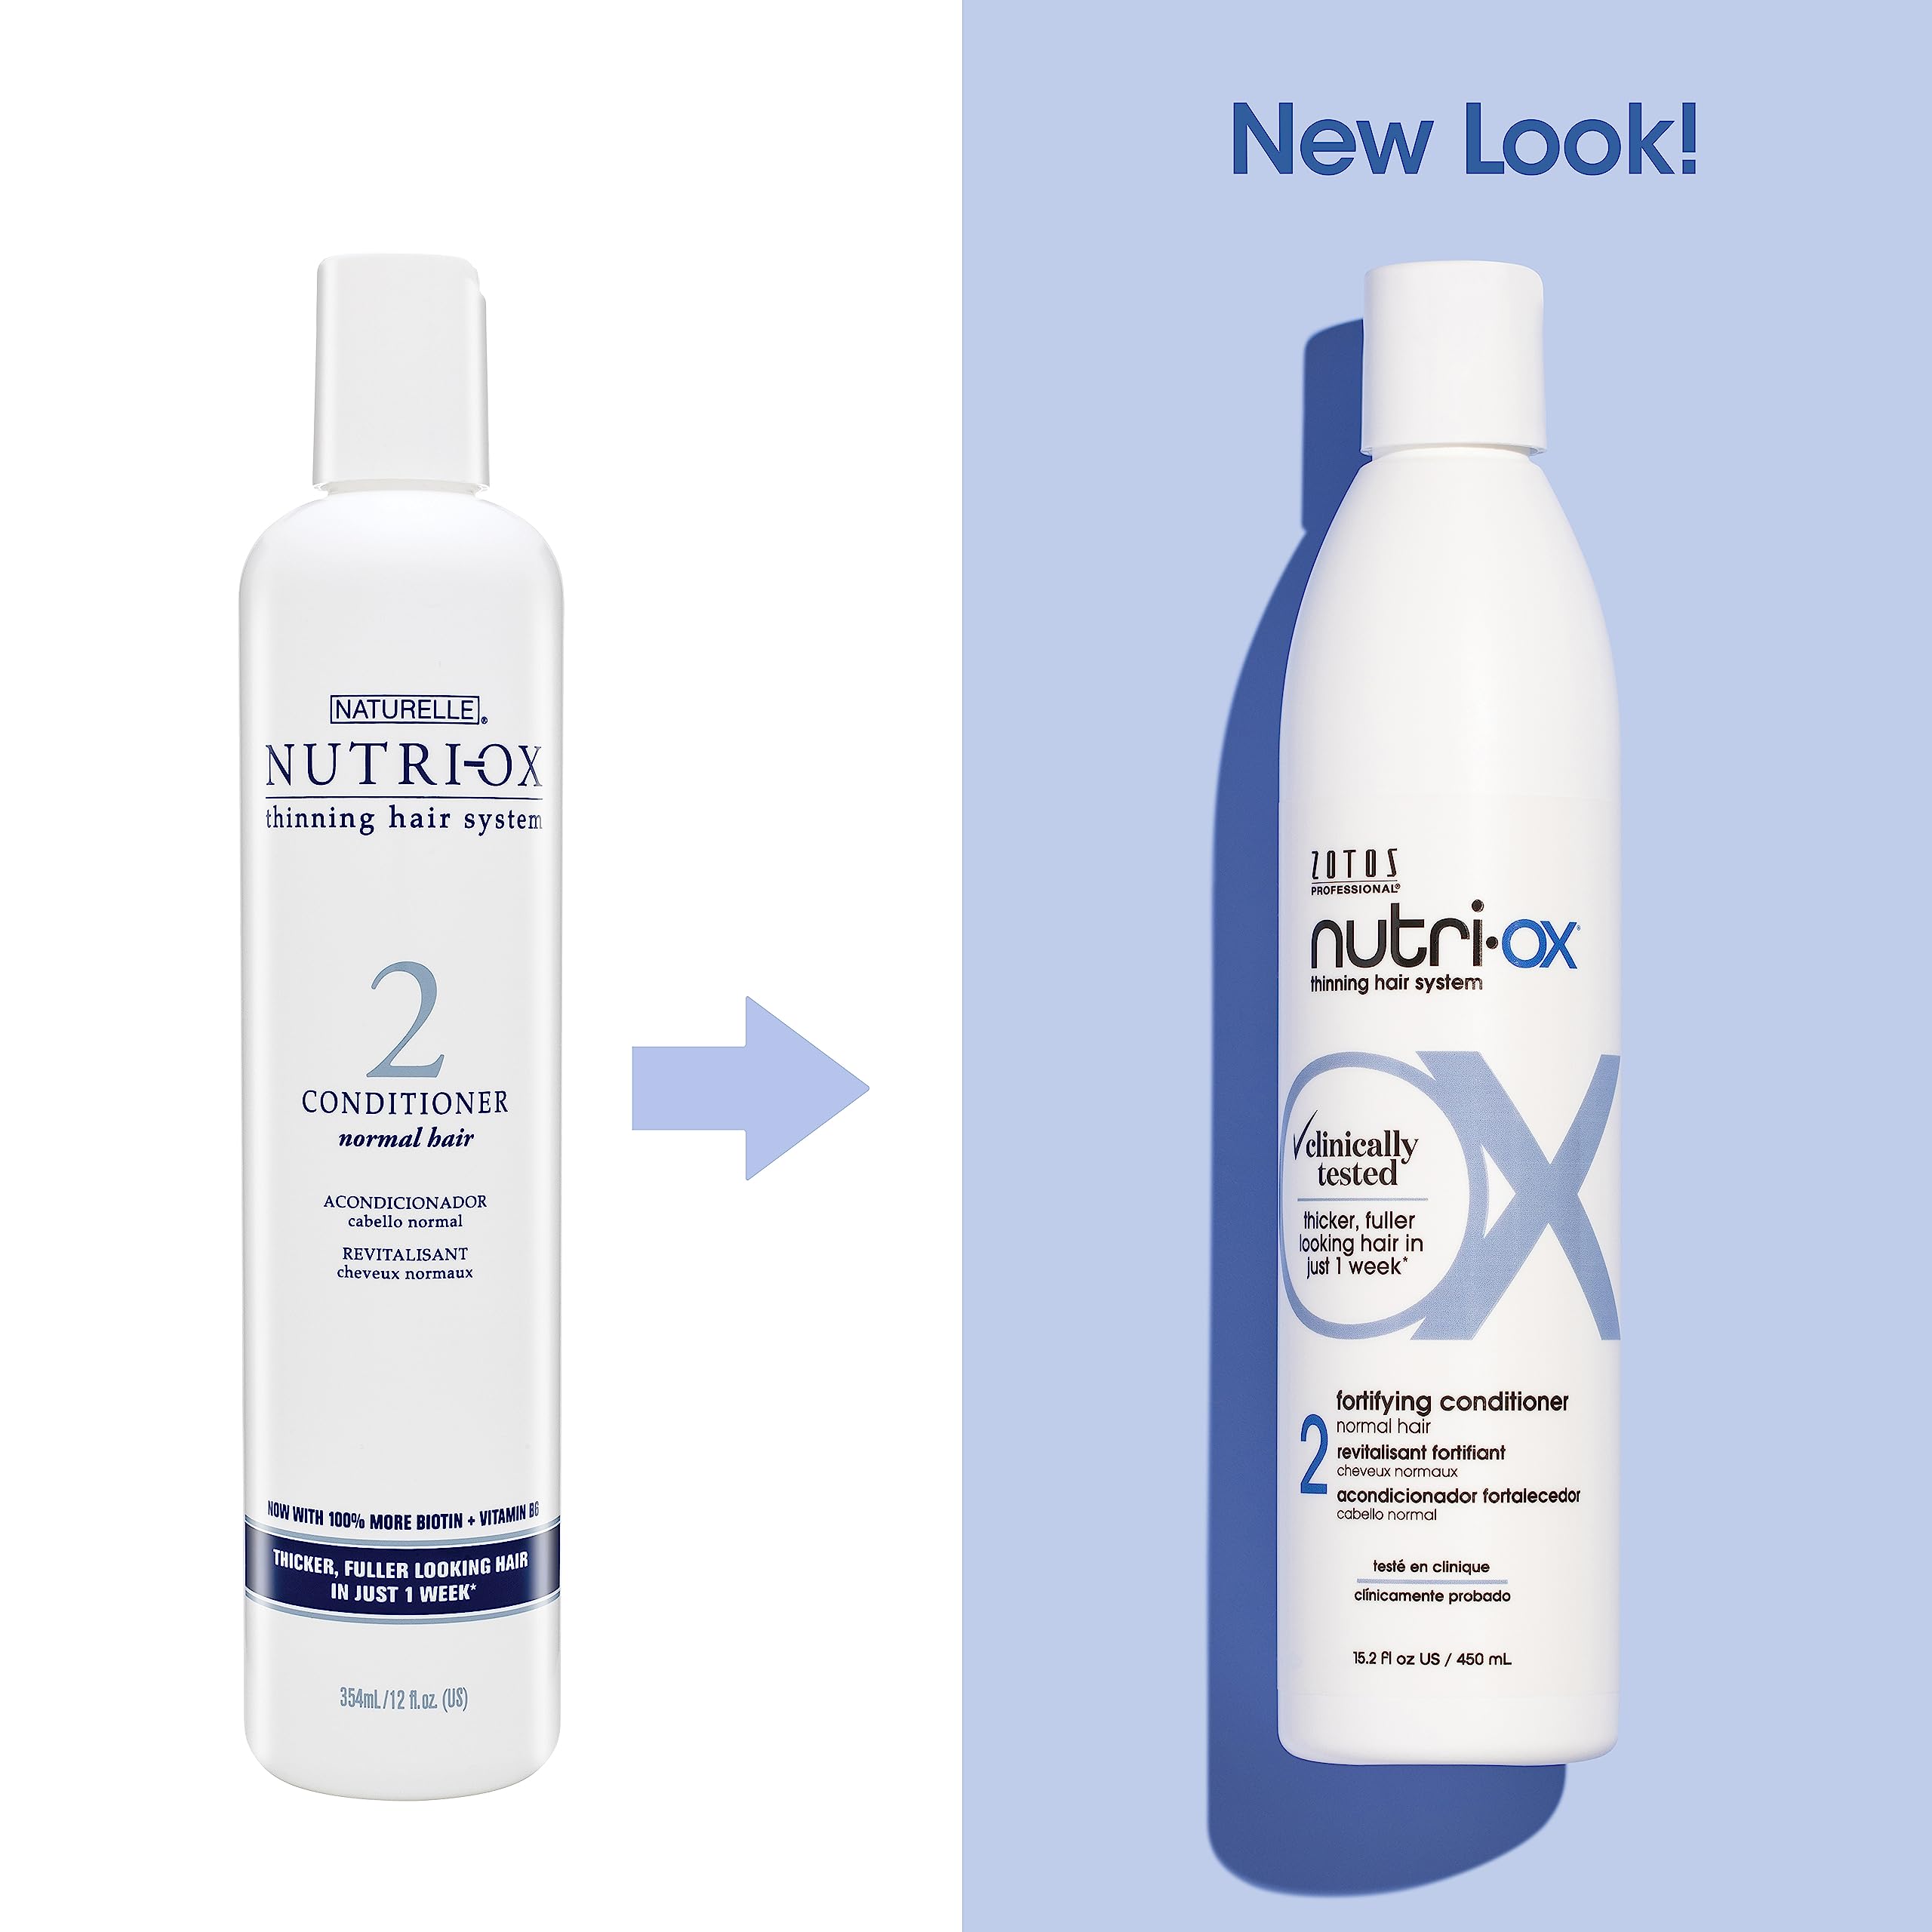 NUTRI-OX Gentle Shampoo & Conditioner for Thicker, Fuller-Looking Hair | Normal Thinning Hair | Peppermint | Clinically & Dermatologically Tested | Color-Safe